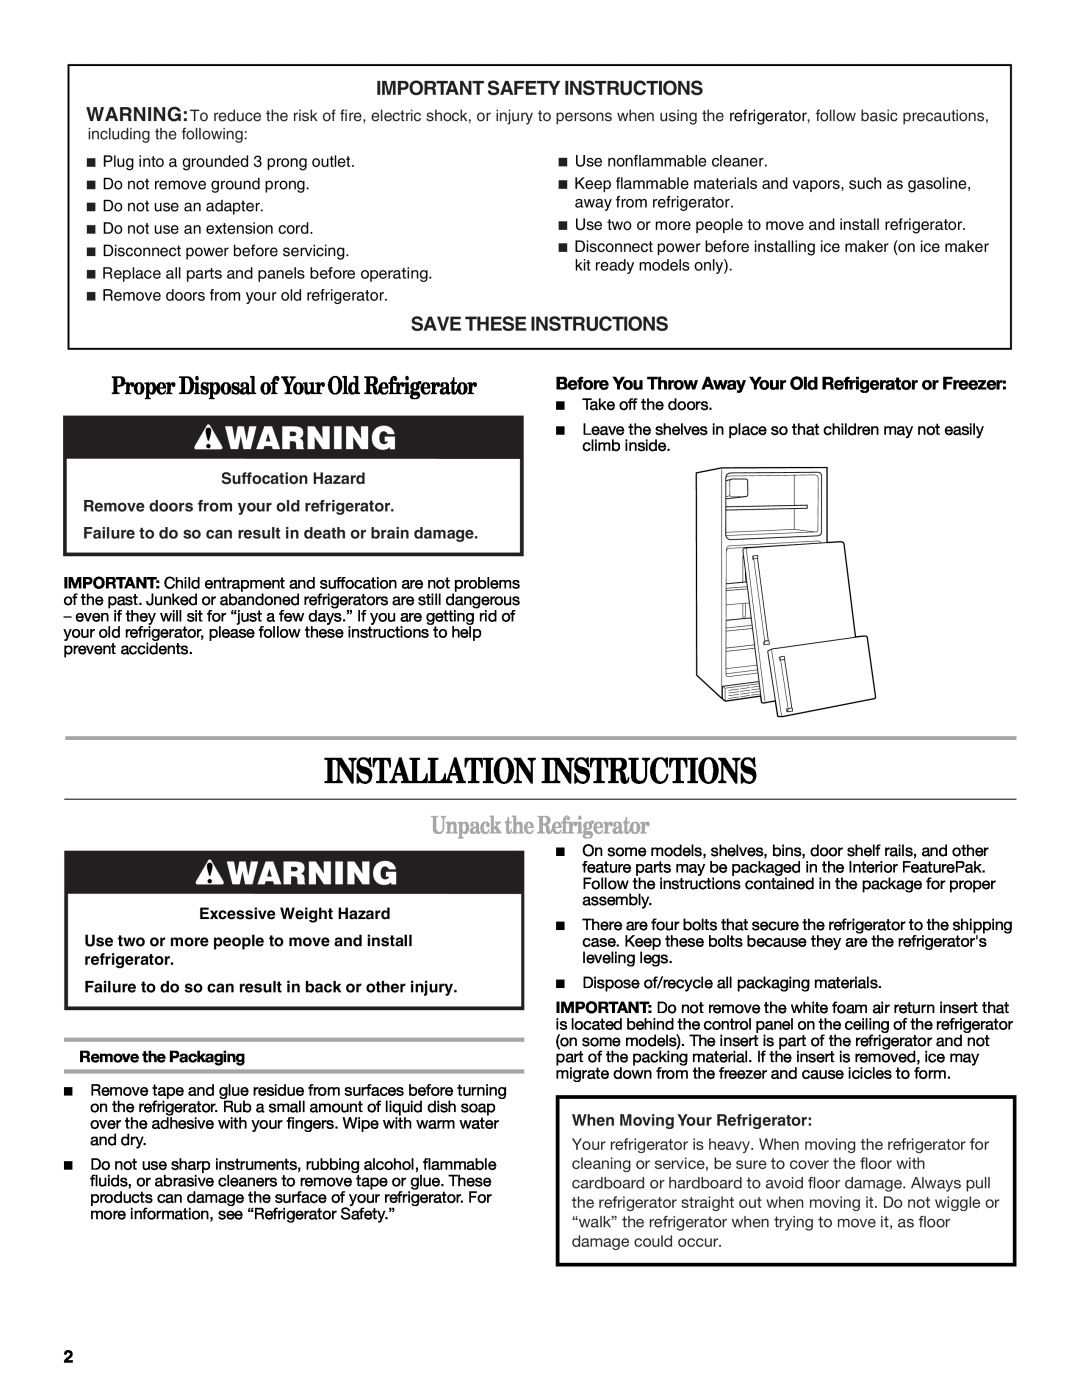 Whirlpool W10214130A Installation Instructions, Unpack the Refrigerator, Important Safety Instructions 